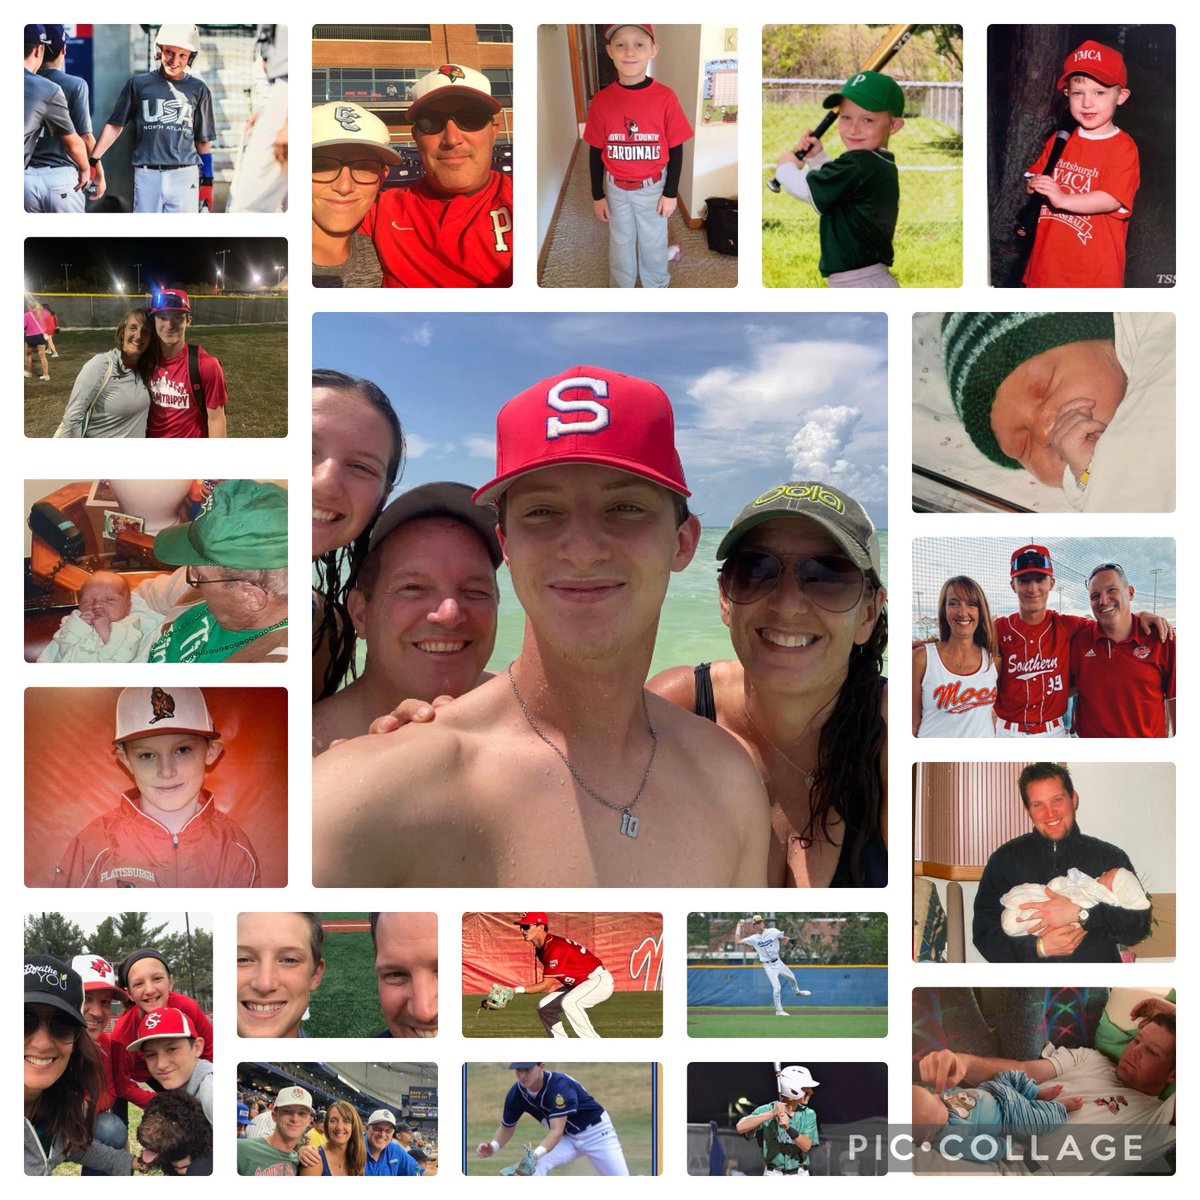 Happy 20th birthday to my favorite son, @BradyDoorey! We’ve had a great 20 years of adventures and I can’t wait for the rest of them! Happy birthday! @MocsBaseball @MarinersLegion